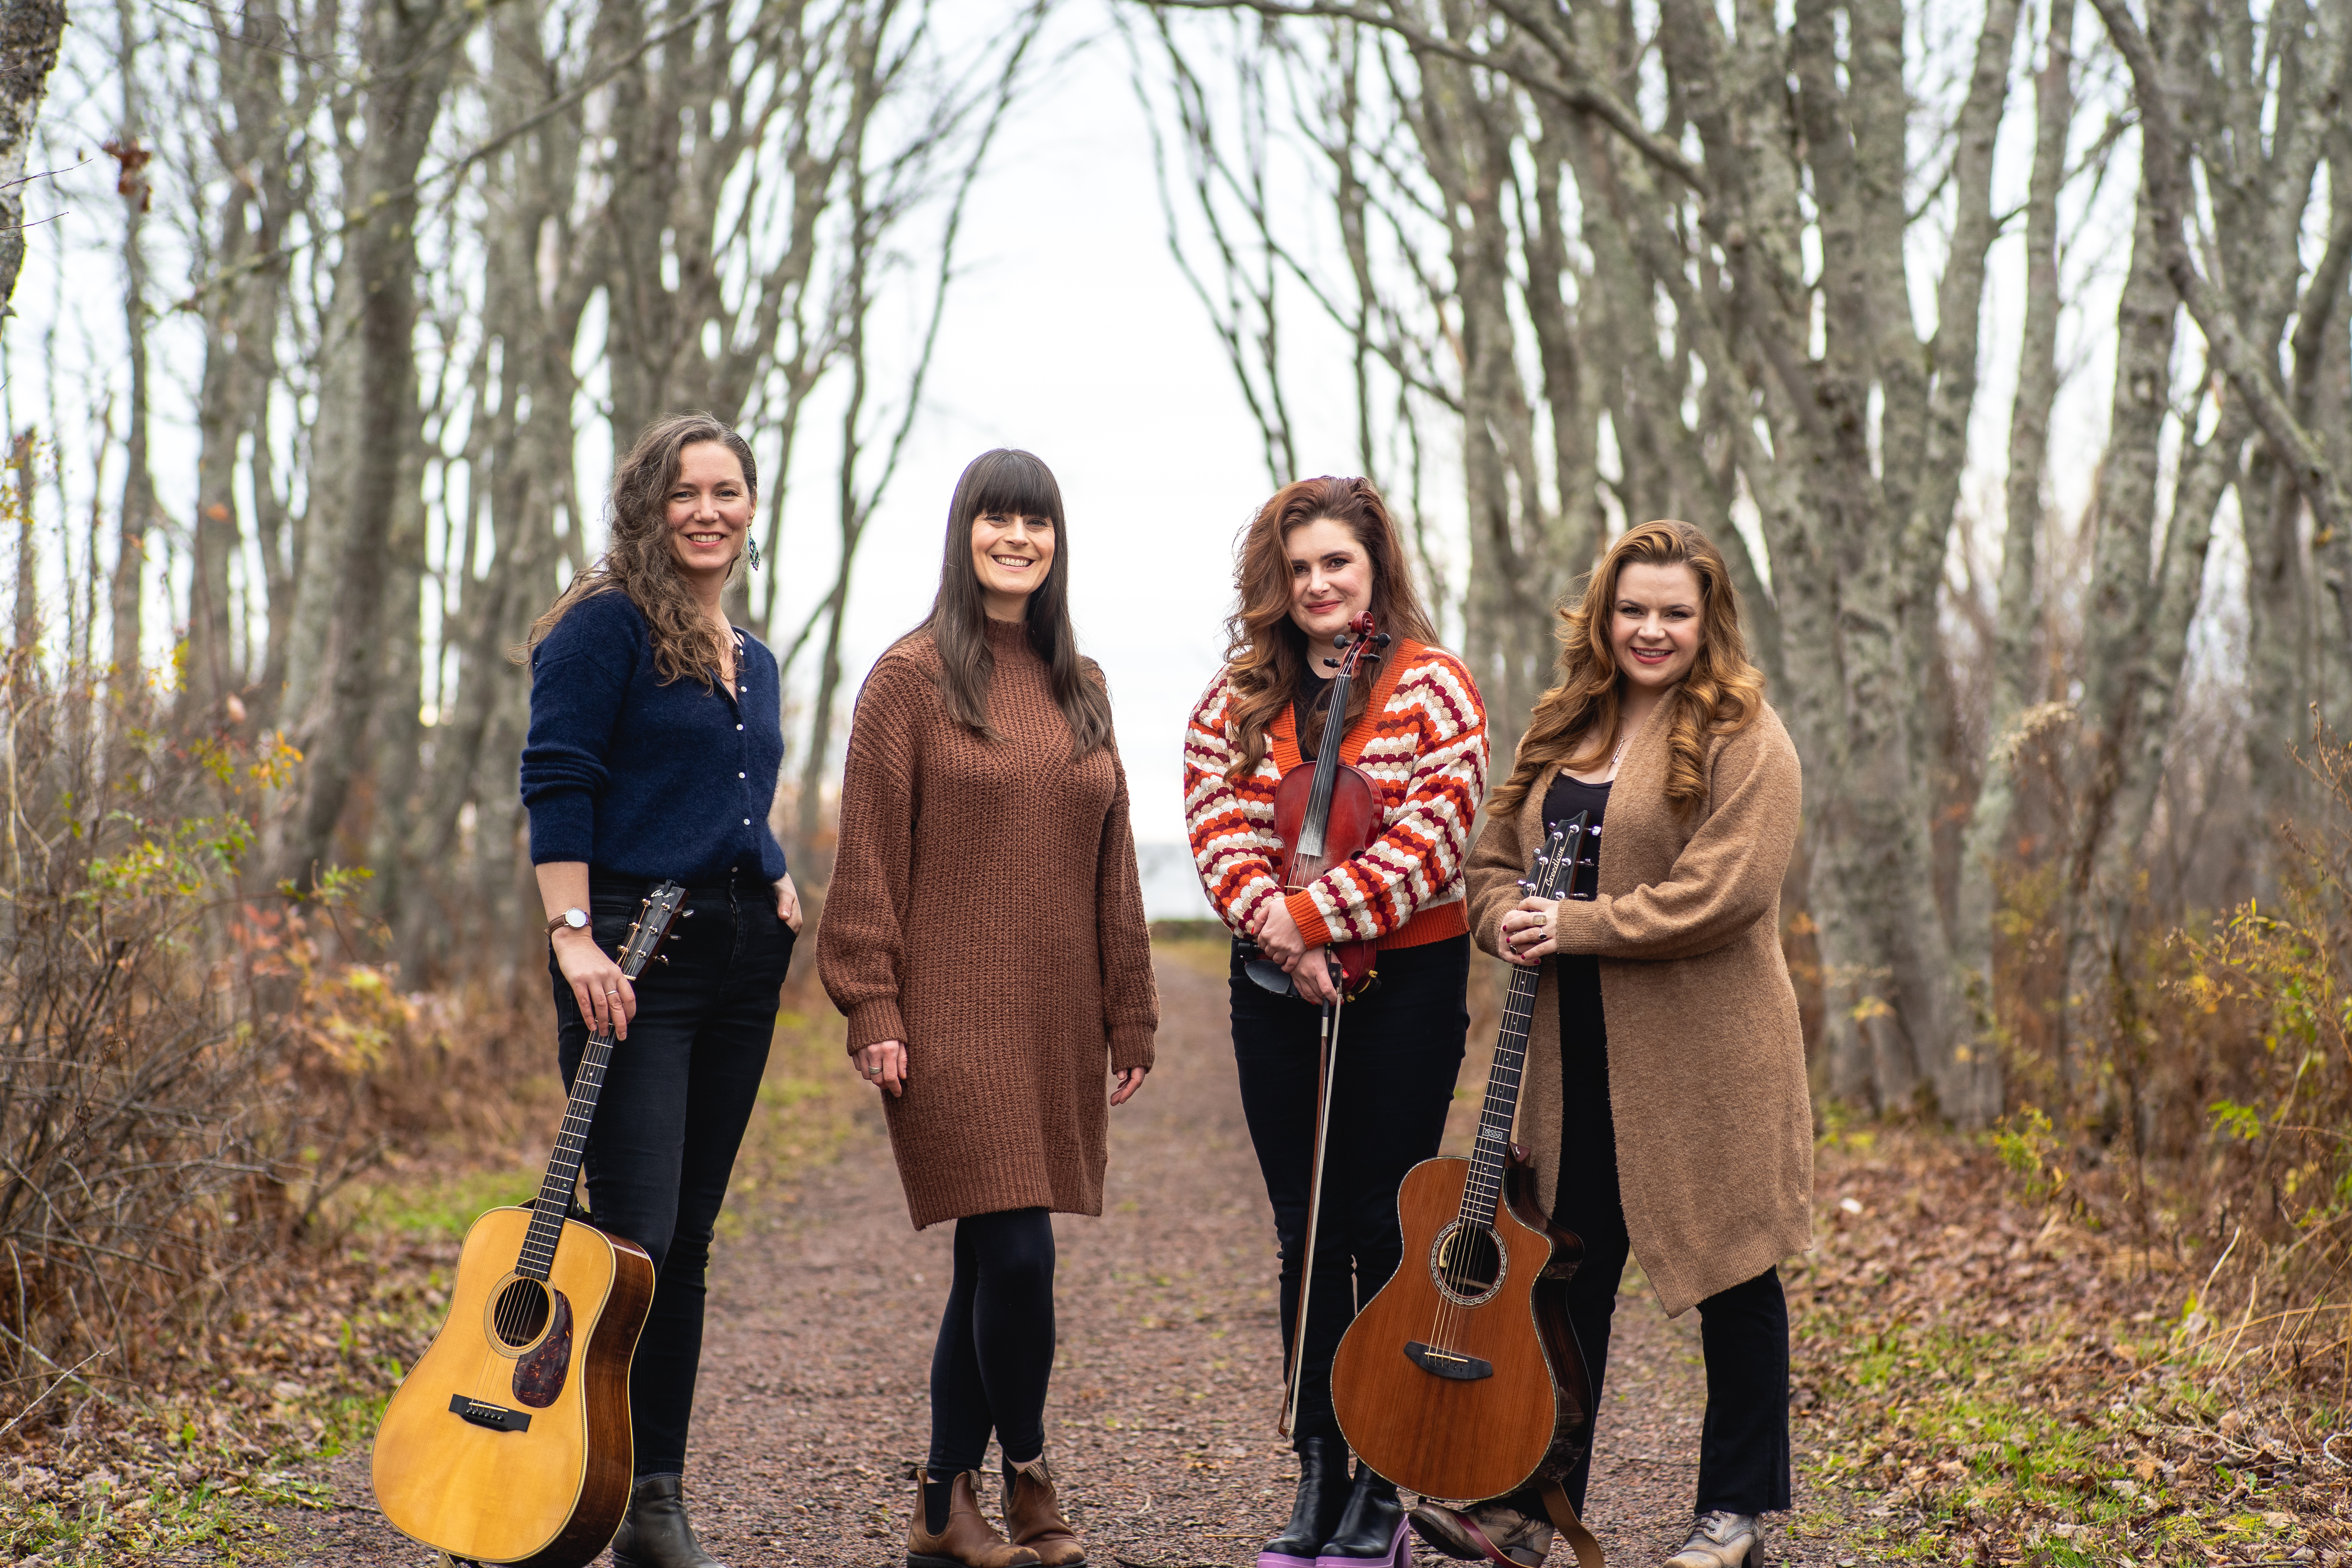 4 women standing on a path outside, two hold guitars, one is holding a fiddle